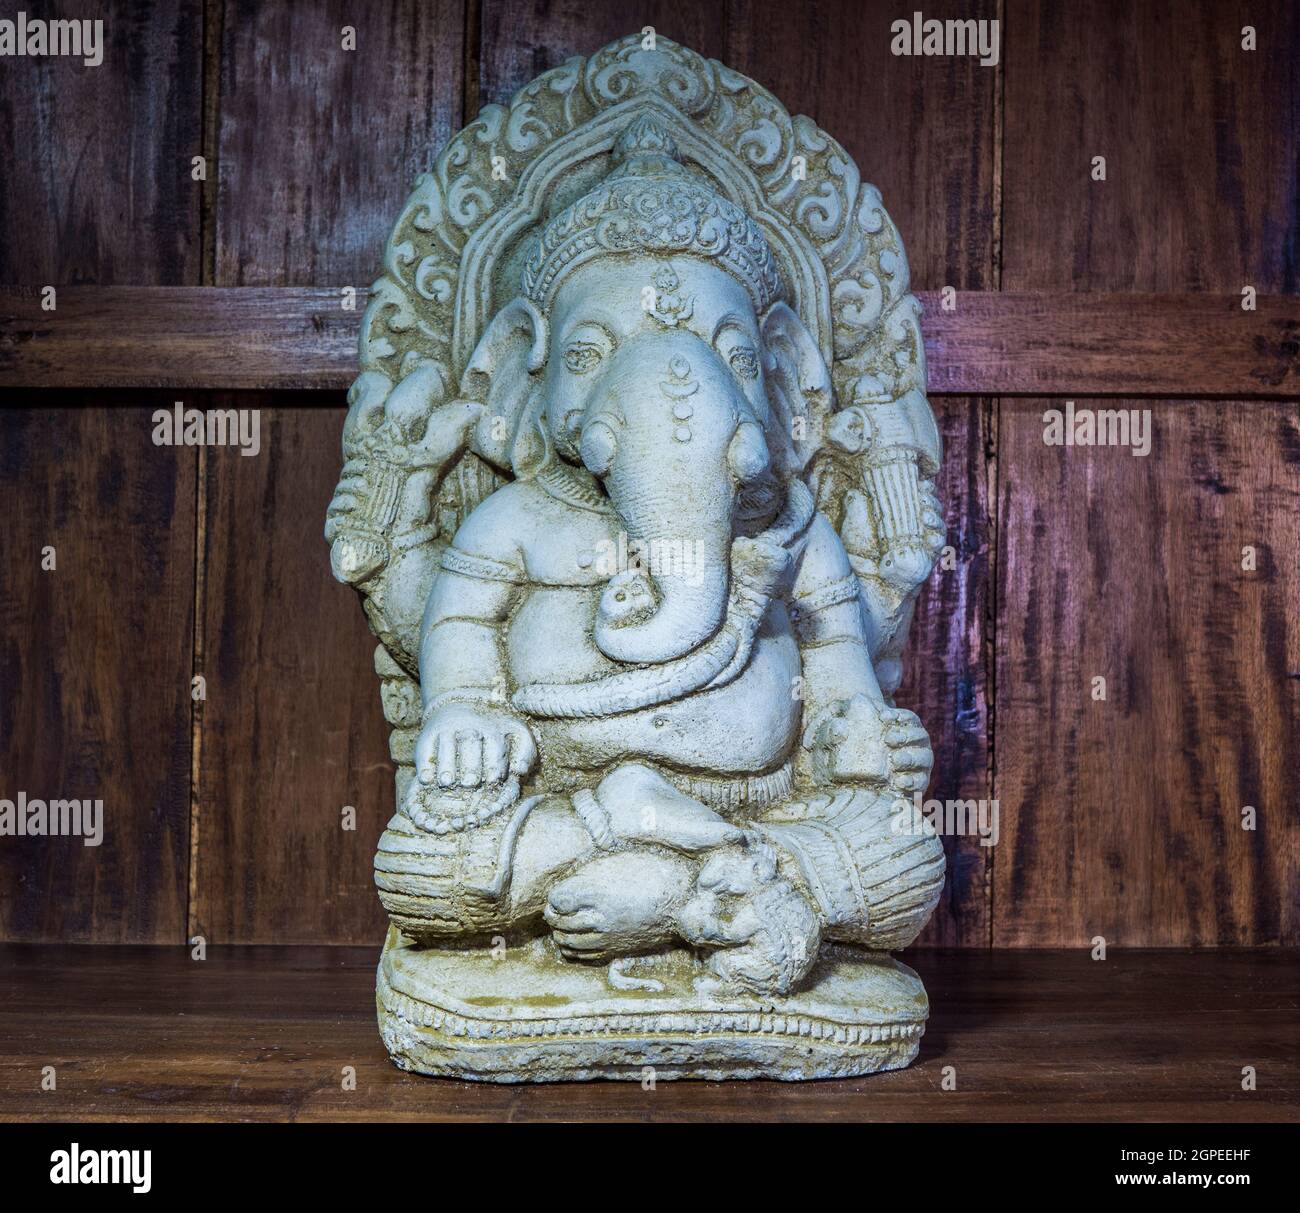 A stone ornament / statue on a shelf in an old wooden cabinet, of Ganesh / Ganesha, the elephant headed Hindu god of beginnings. Stock Photo